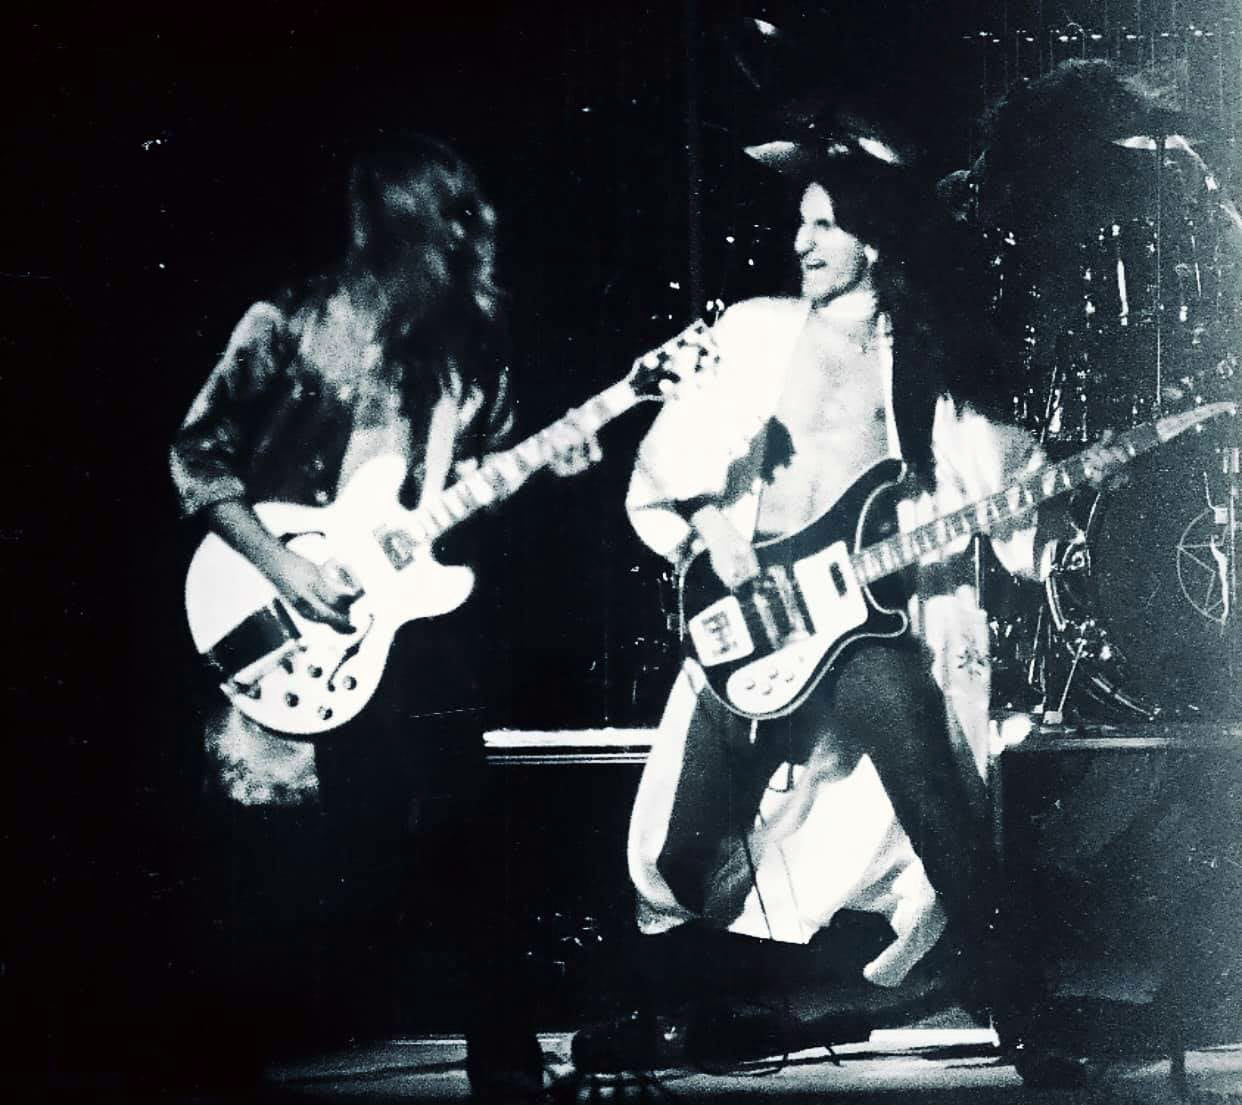 Rush 'A Farewell to Kings' Tour Pictures - Music Hall - Houston, Texas - October 20th, 1977